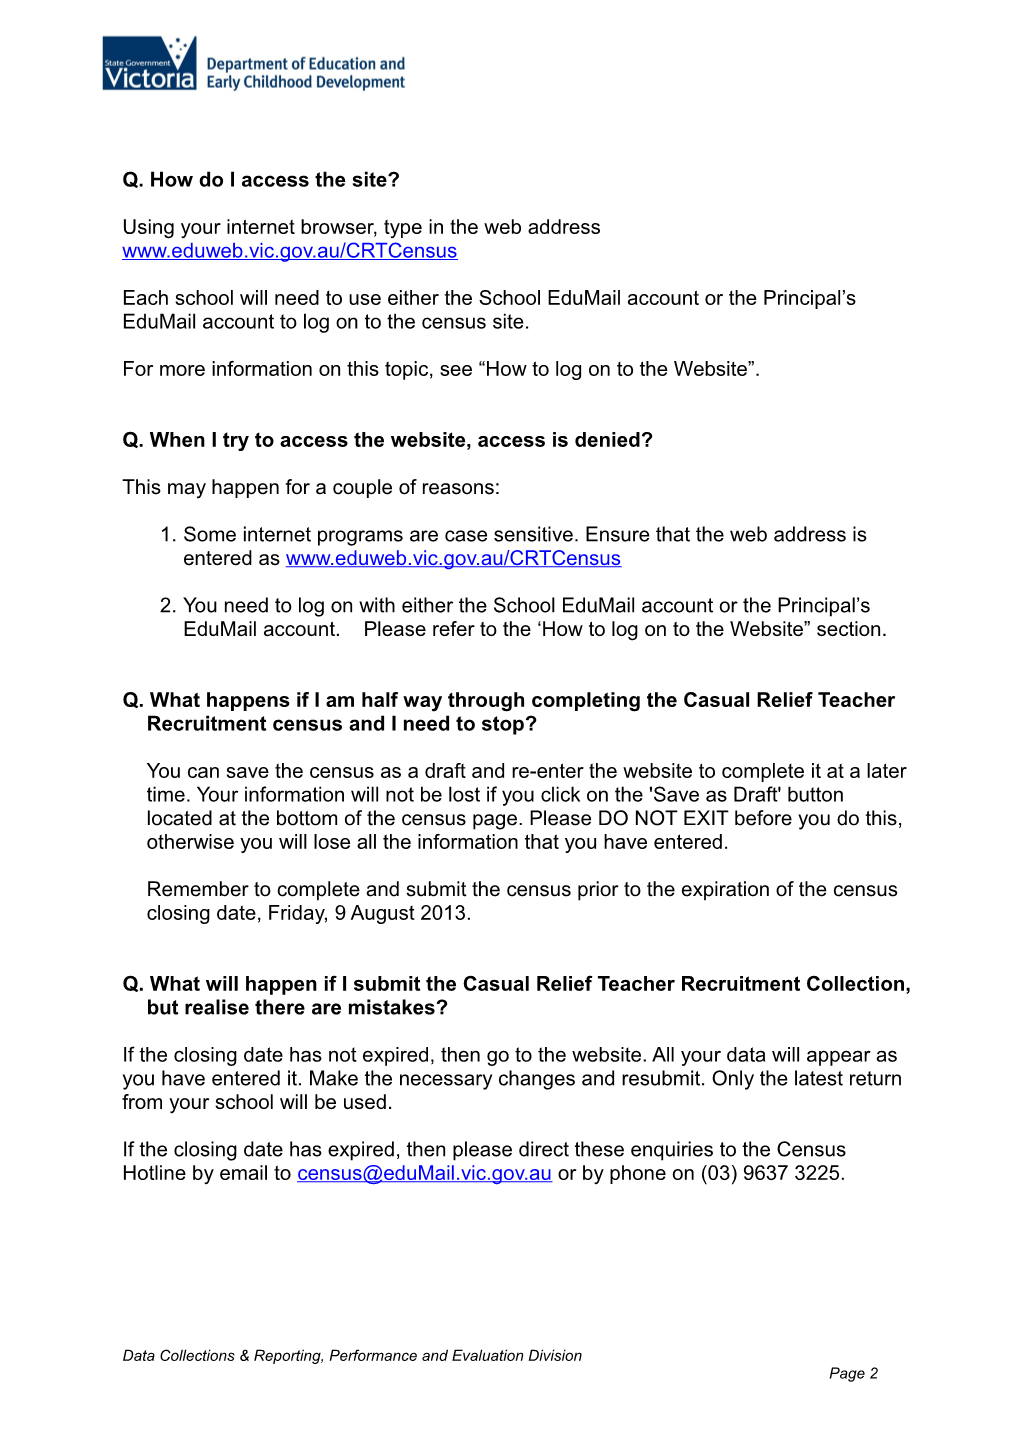 Faqs About Casual Relief Teacher Census Collection